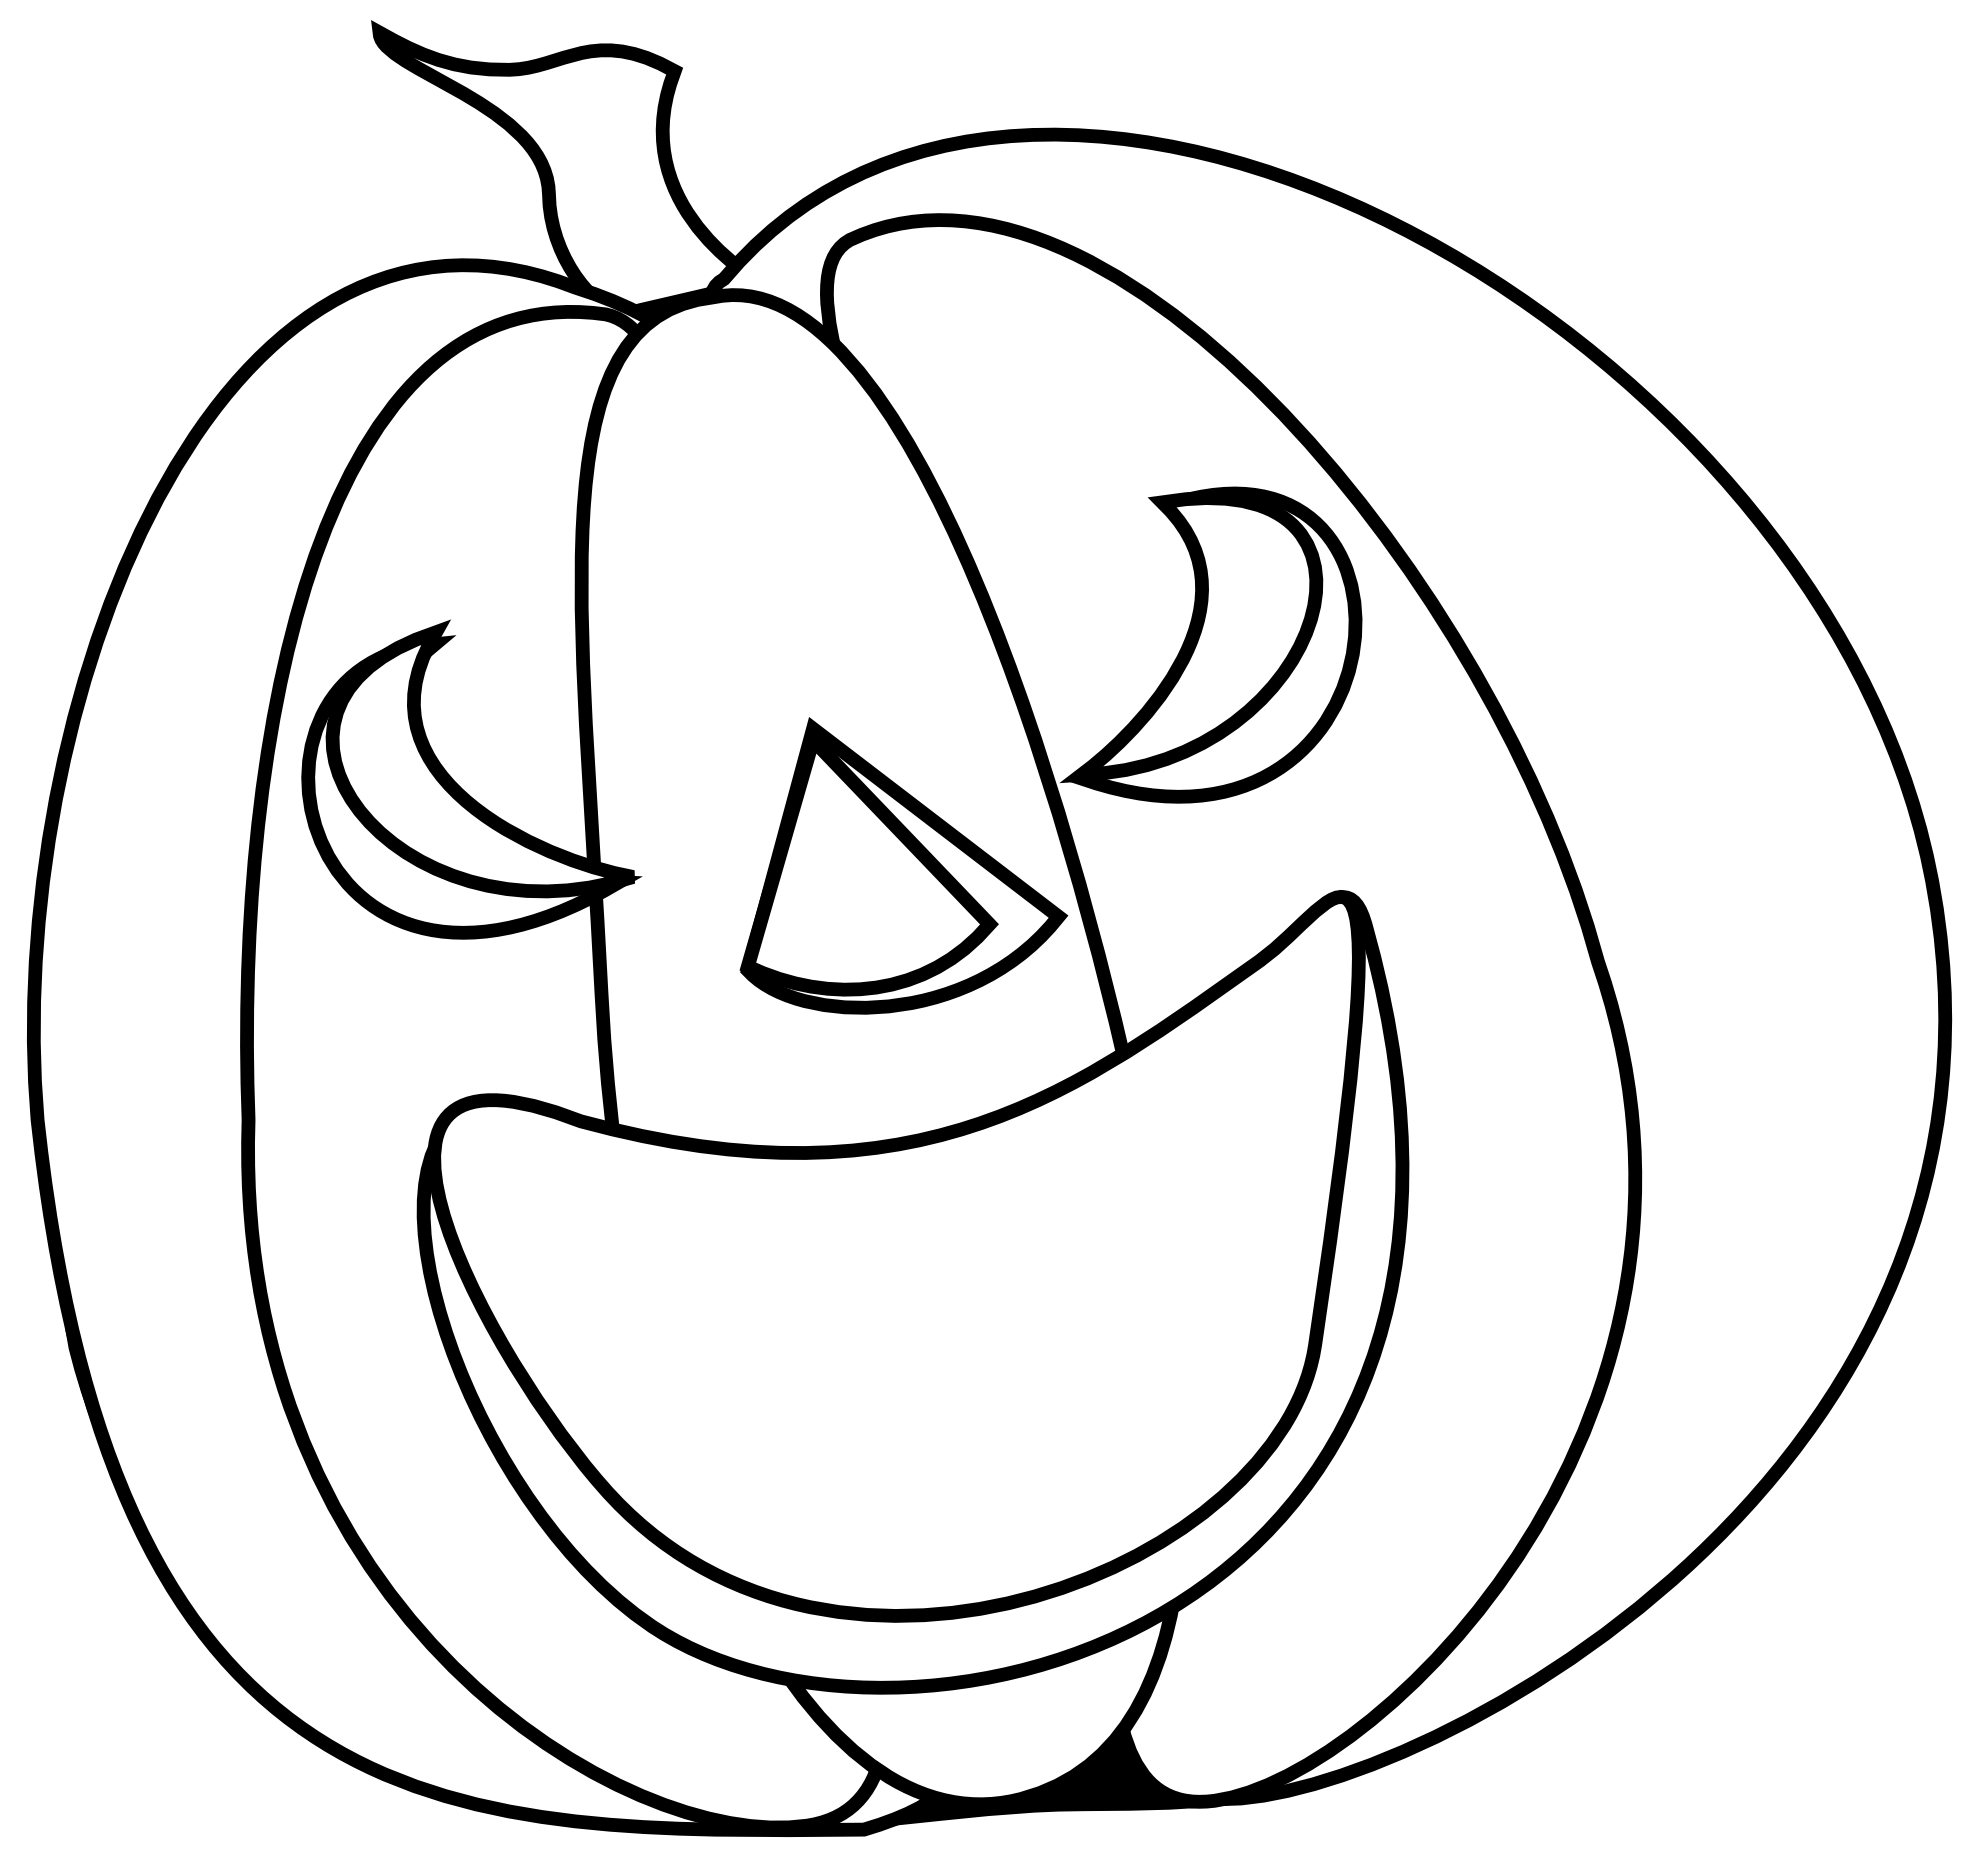 Free Halloween Clip Art Free Black And White, Download Free Halloween ...